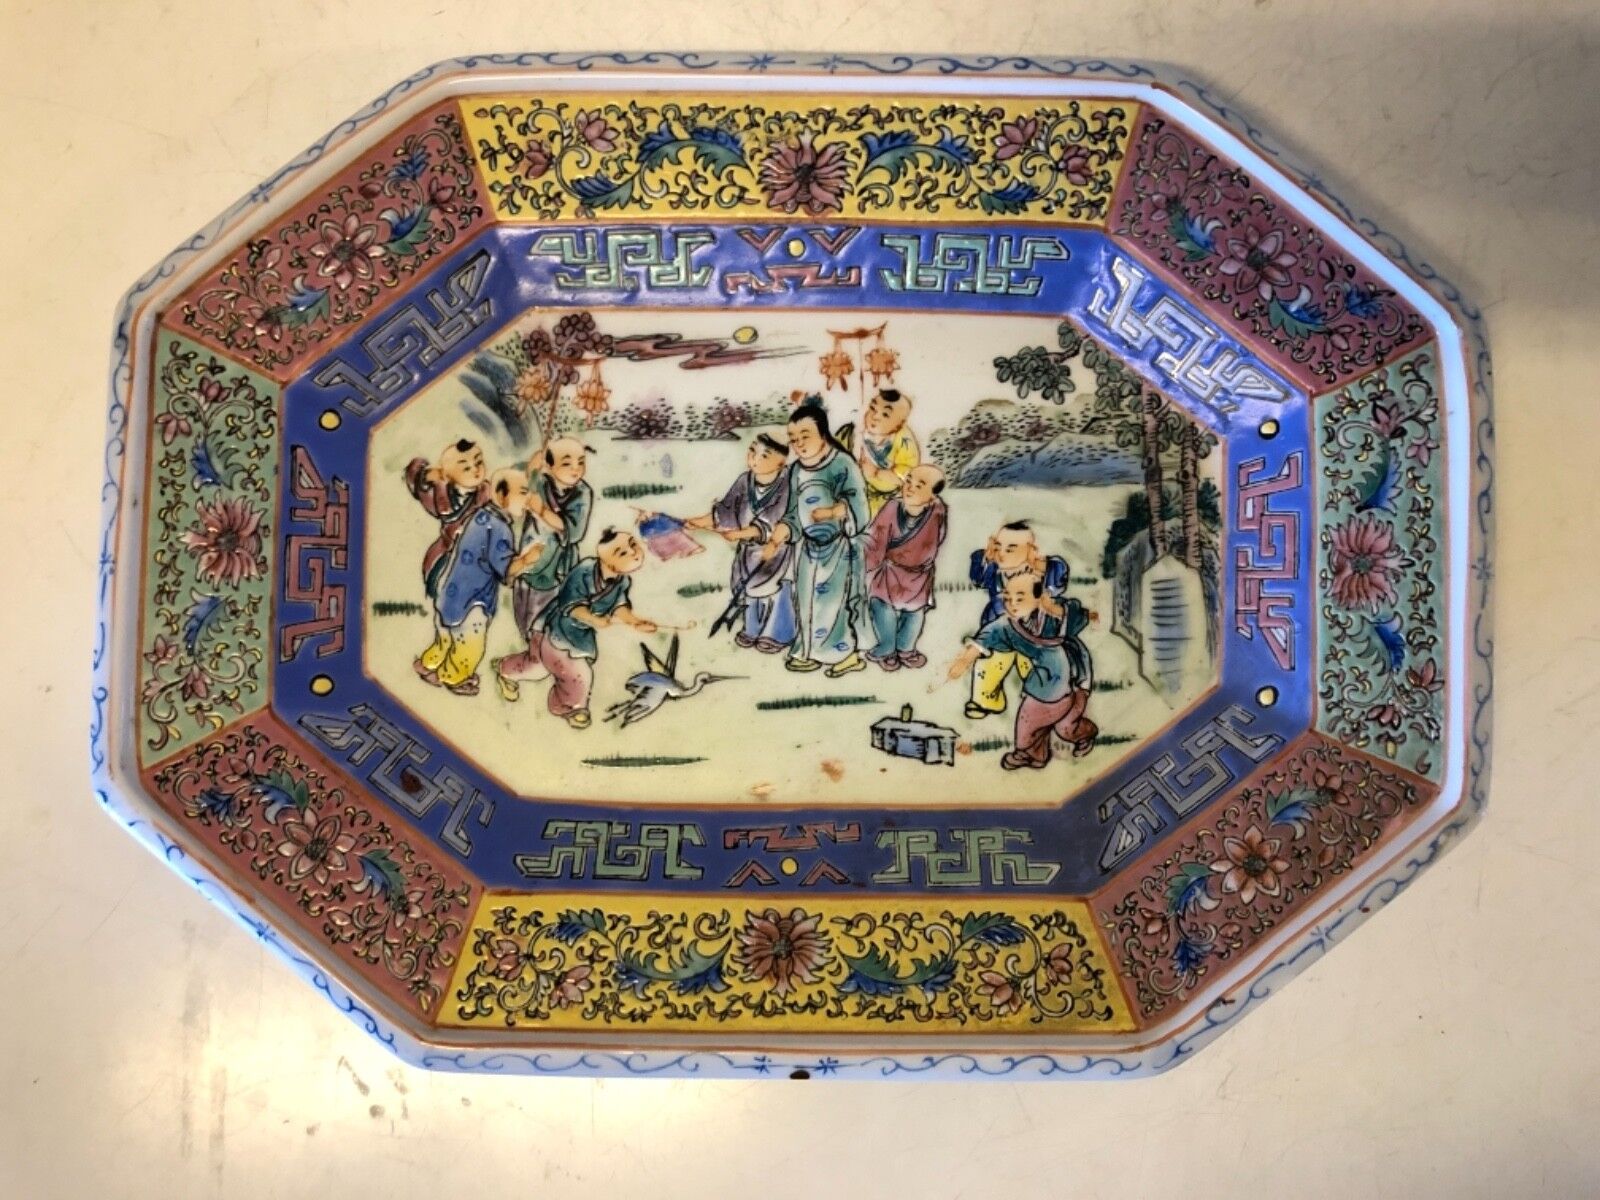 Vintage Chinese Ceramic Colored Floral Platter with Children Playing Scene